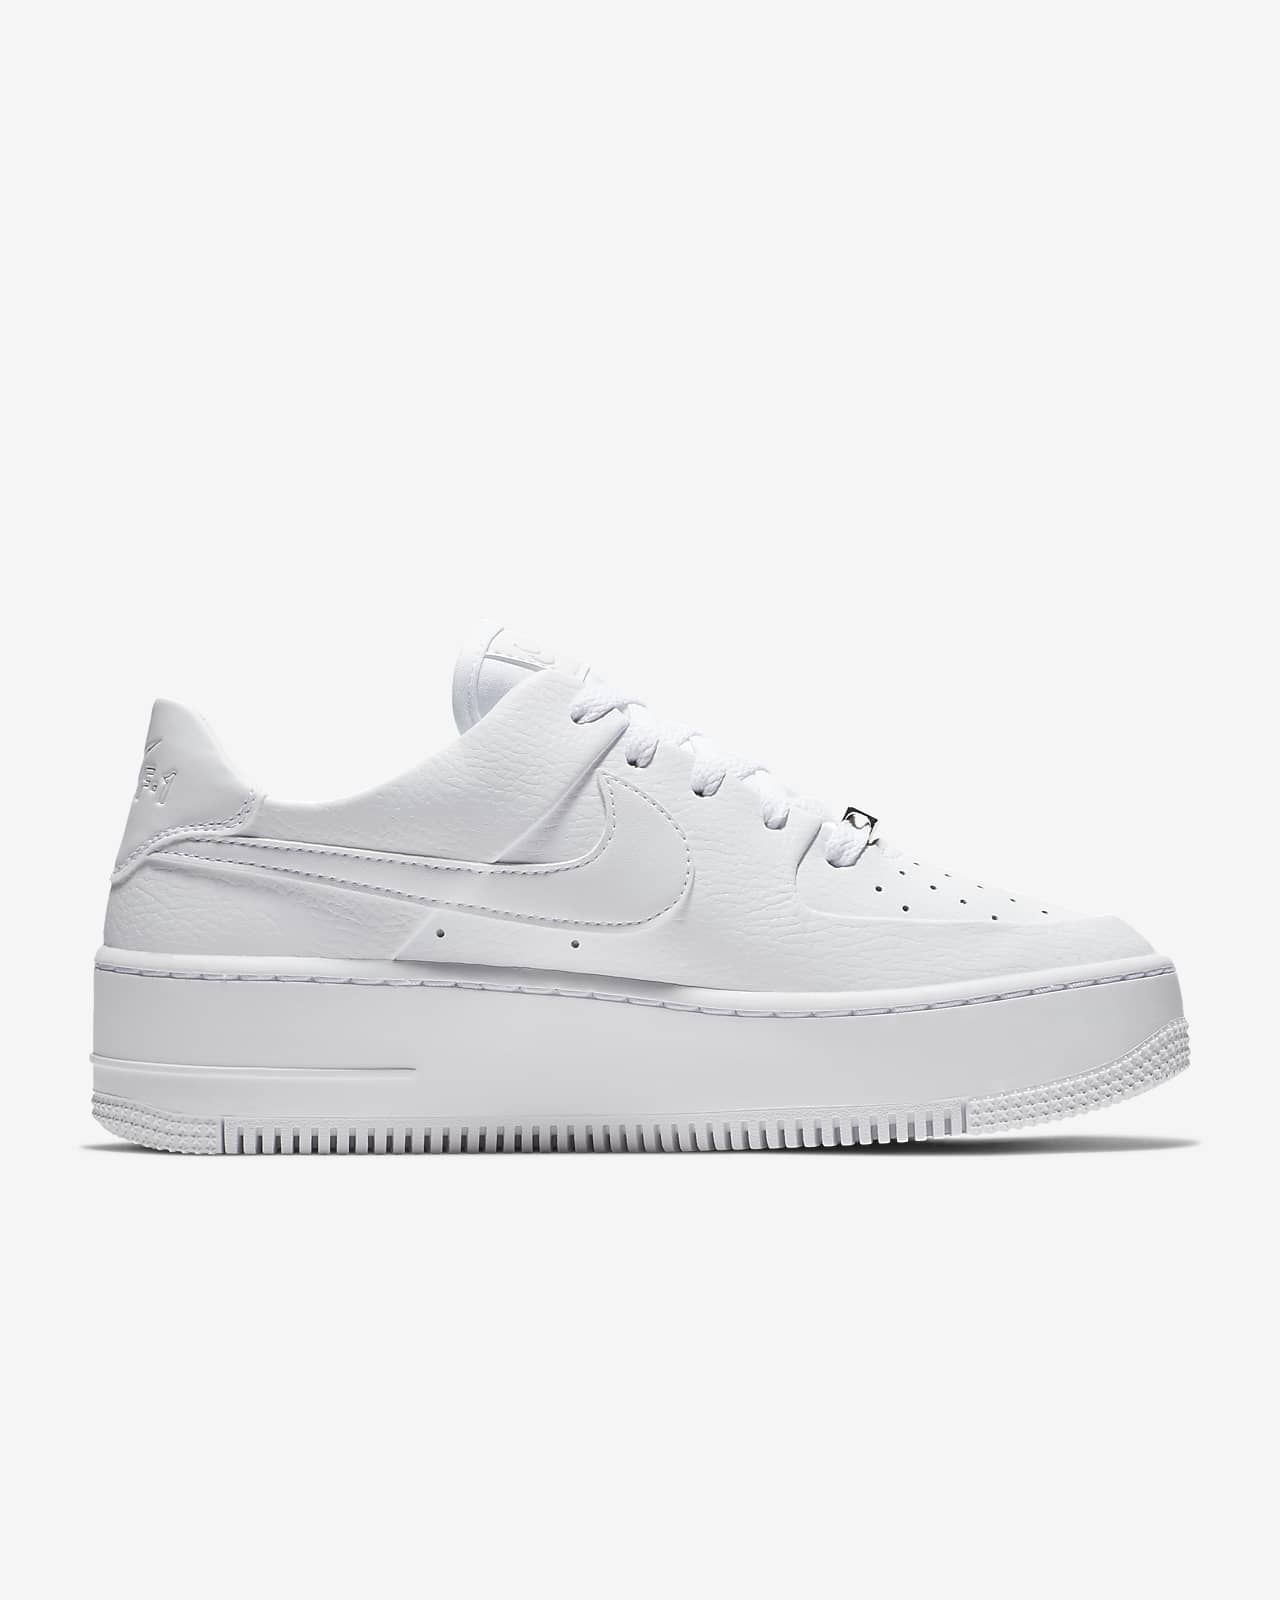 nike air force 1 sage low size 7.5